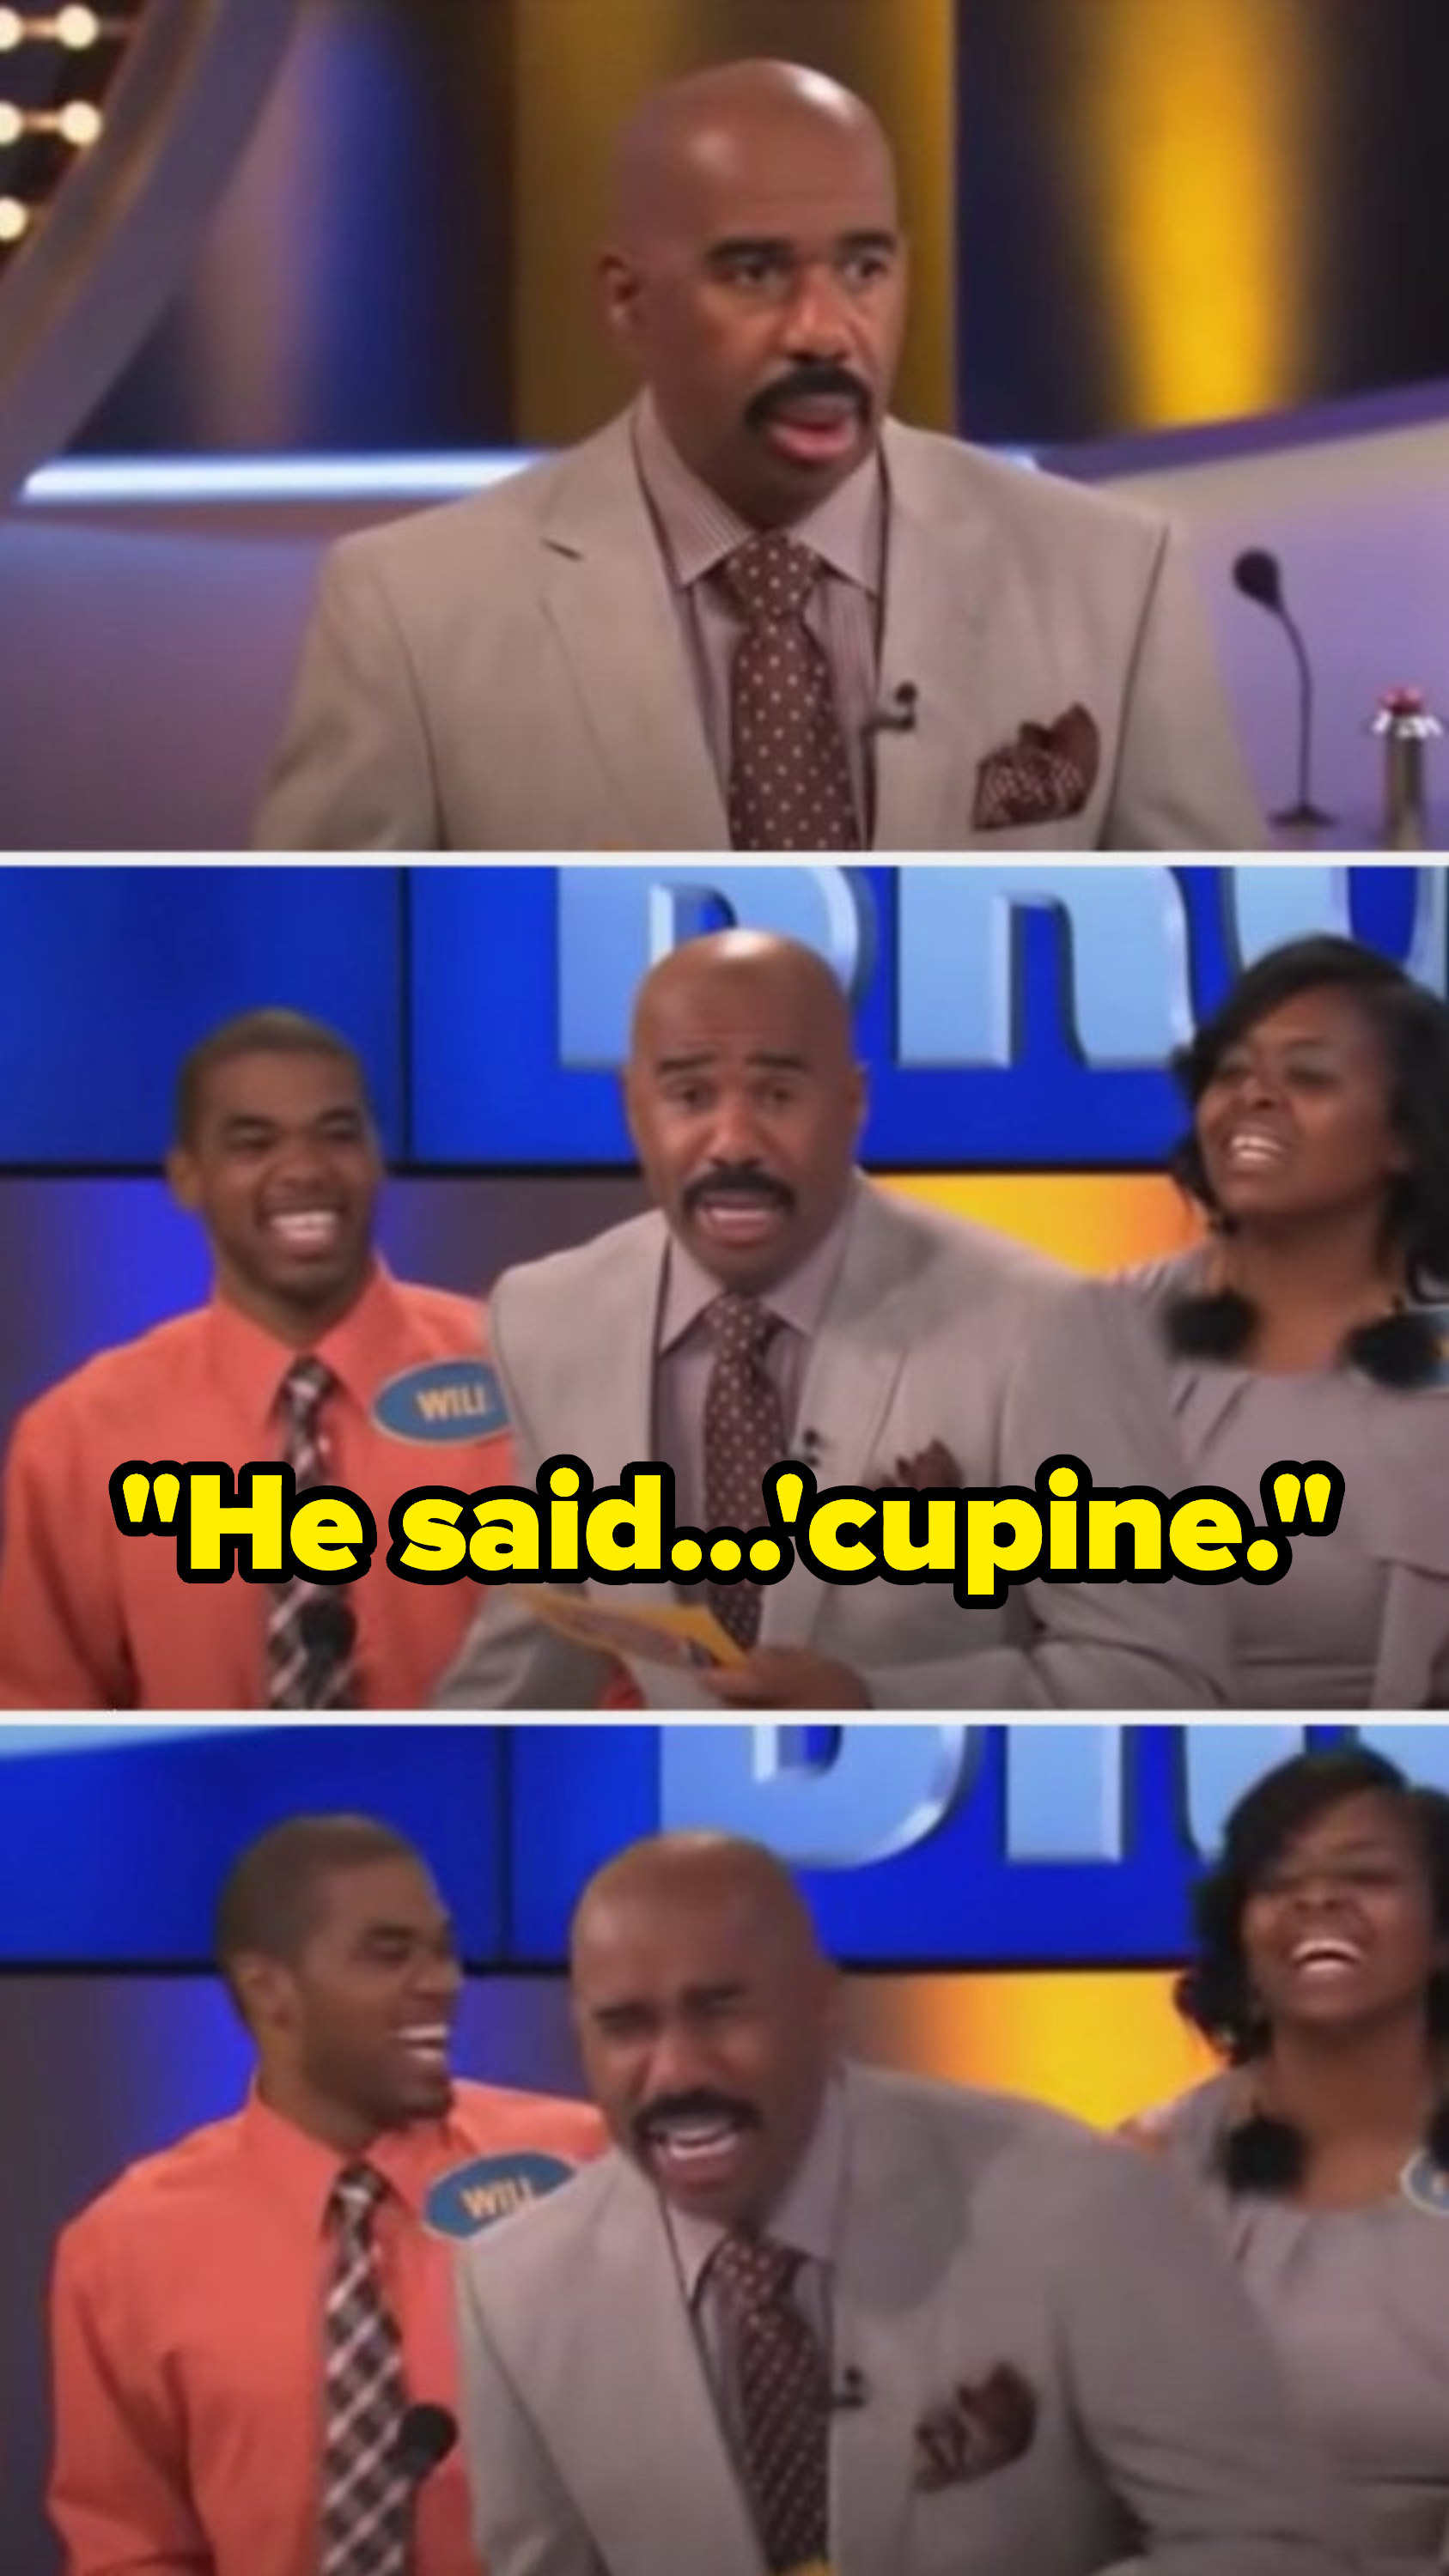 Steve looks shocked then says, &quot;He said &#x27;cupine&quot; then cracks up laughing